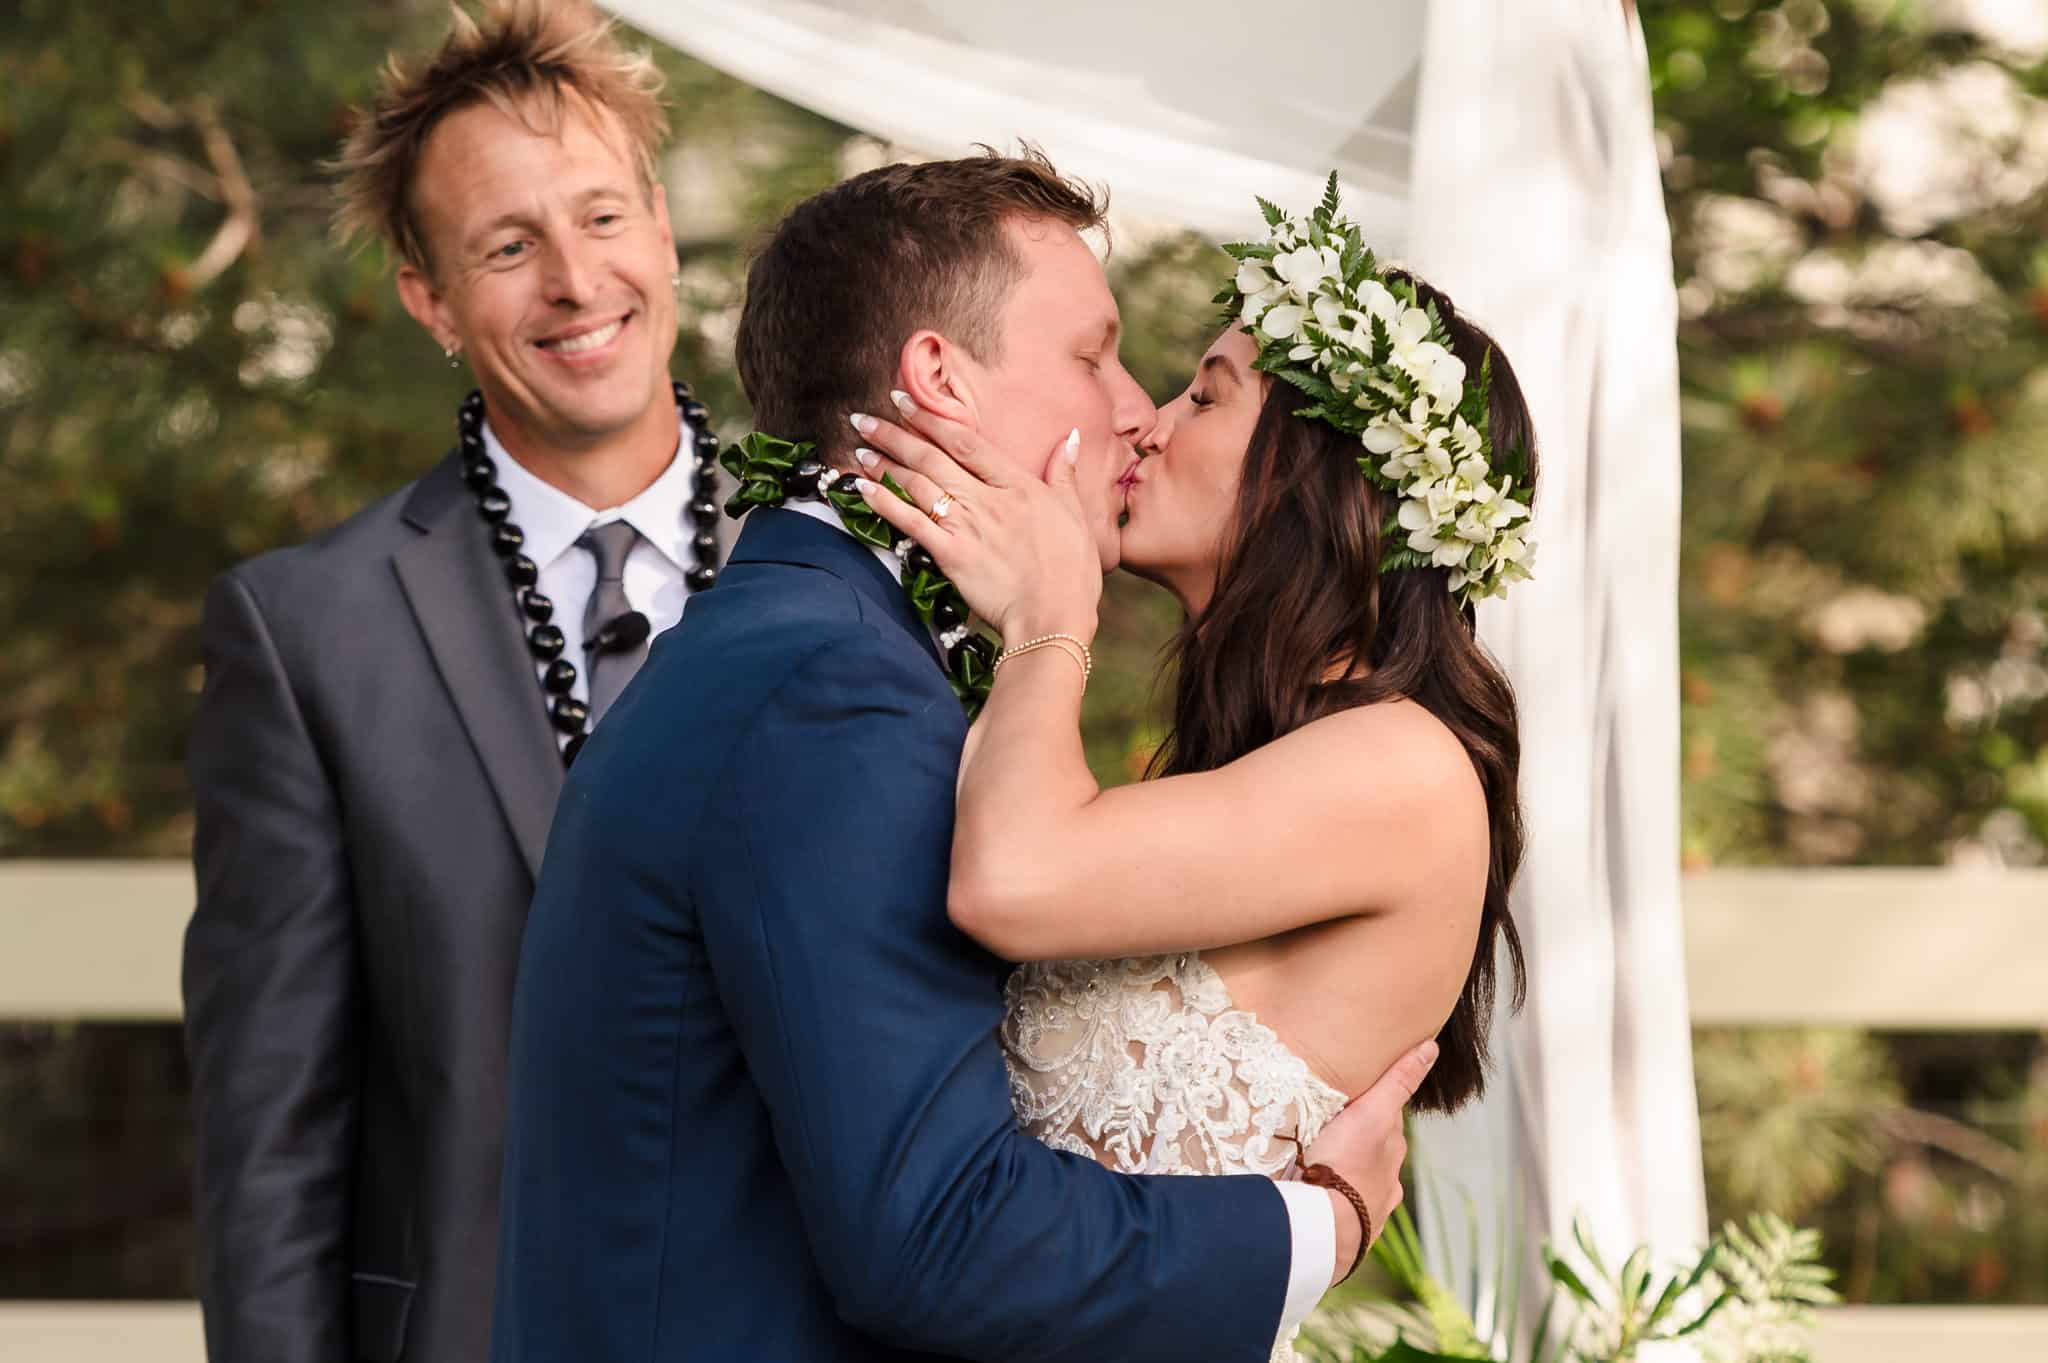 A smiling officiant looks on as the bride and groom share their first kiss at their Hawaiian-inspired backyard wedding.